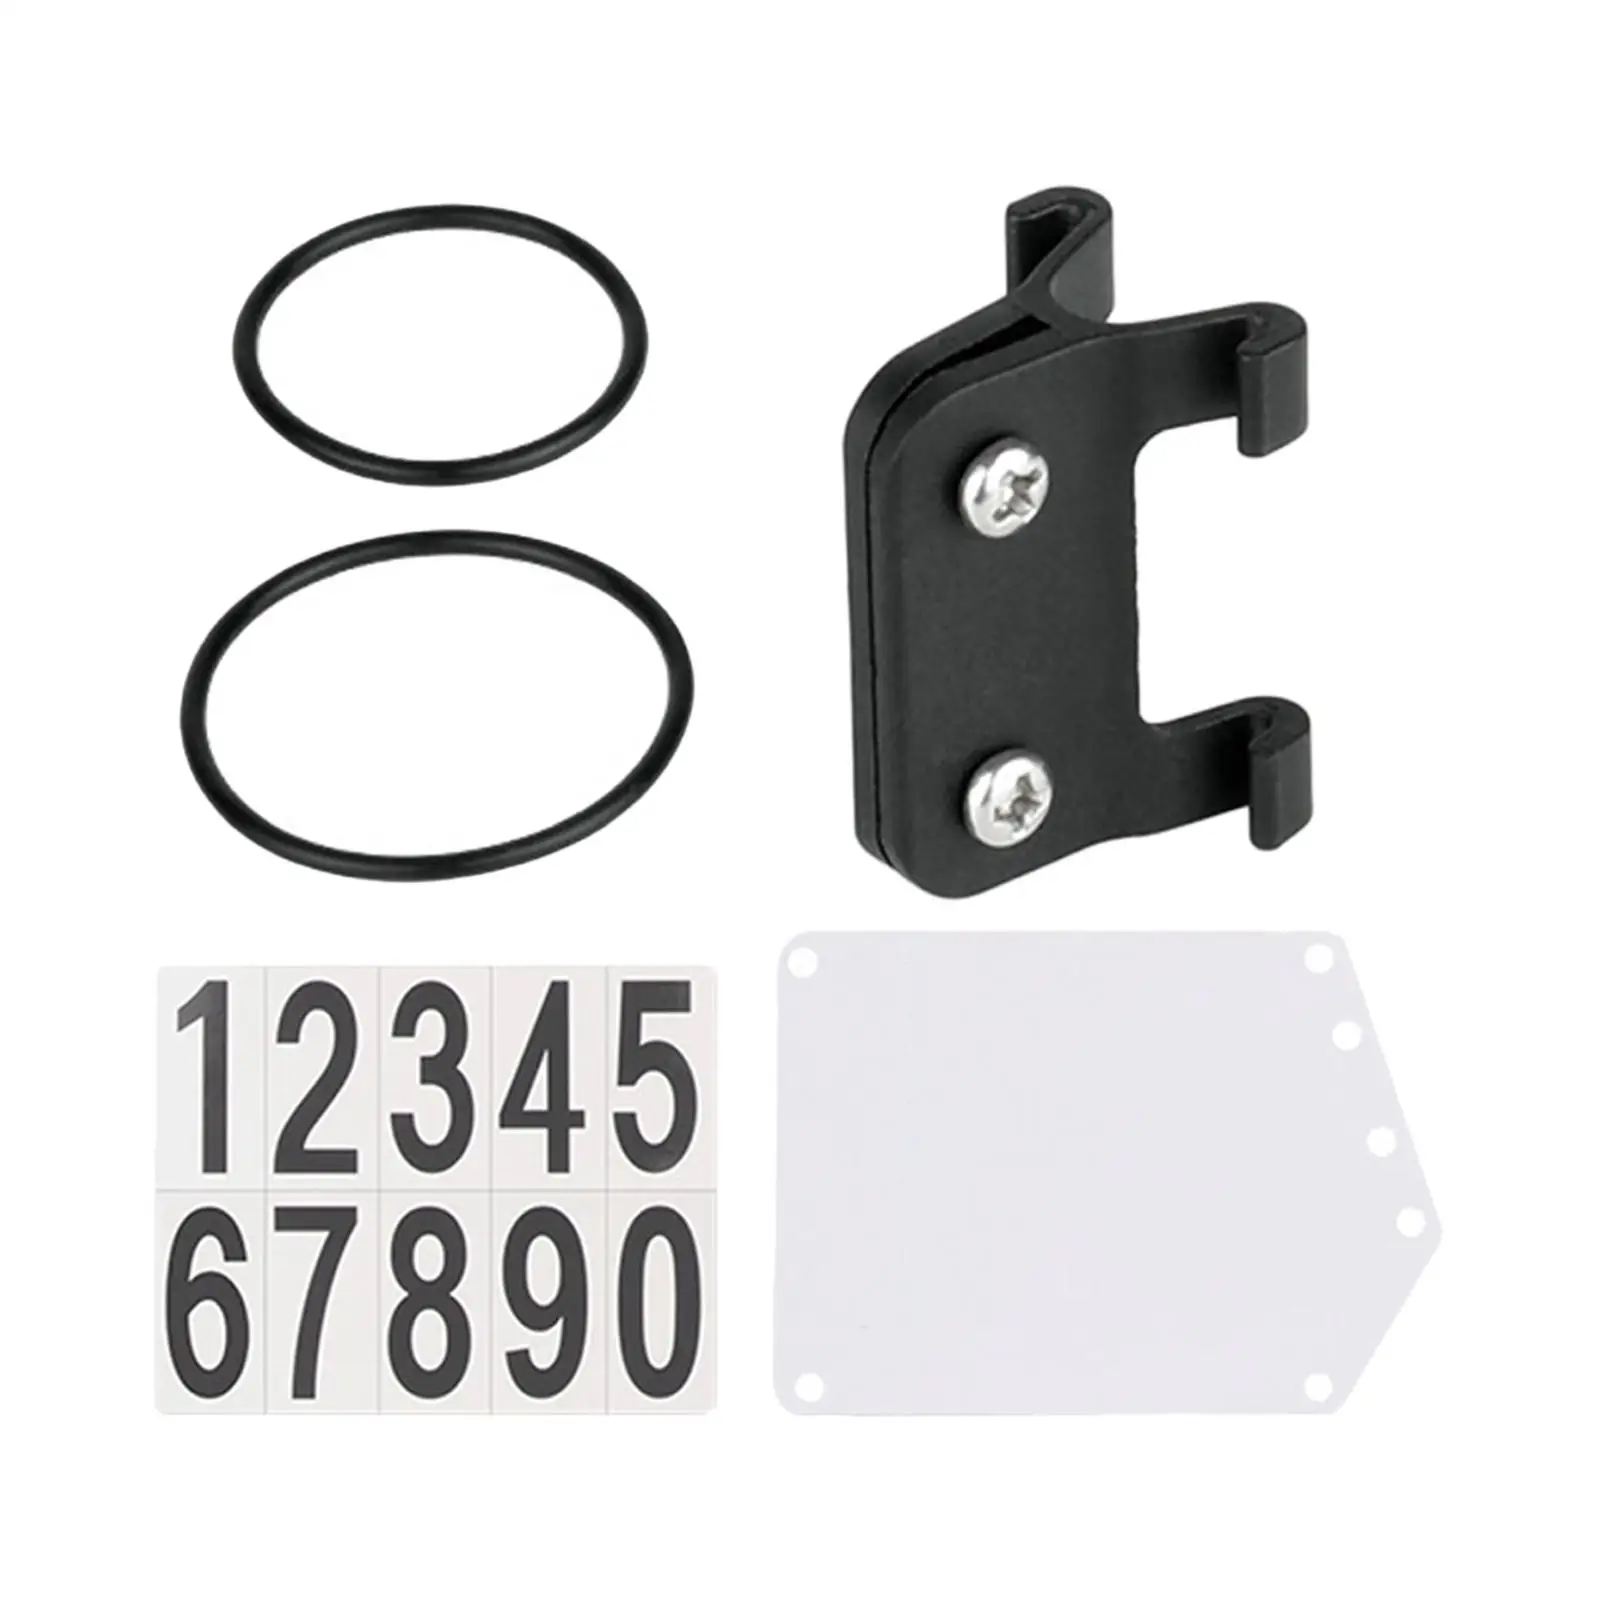 Racing Number Plate and Holder Quick Release with Bands Fixed Parts Bracket PP for Cycling Triathlon Race Rear Bike